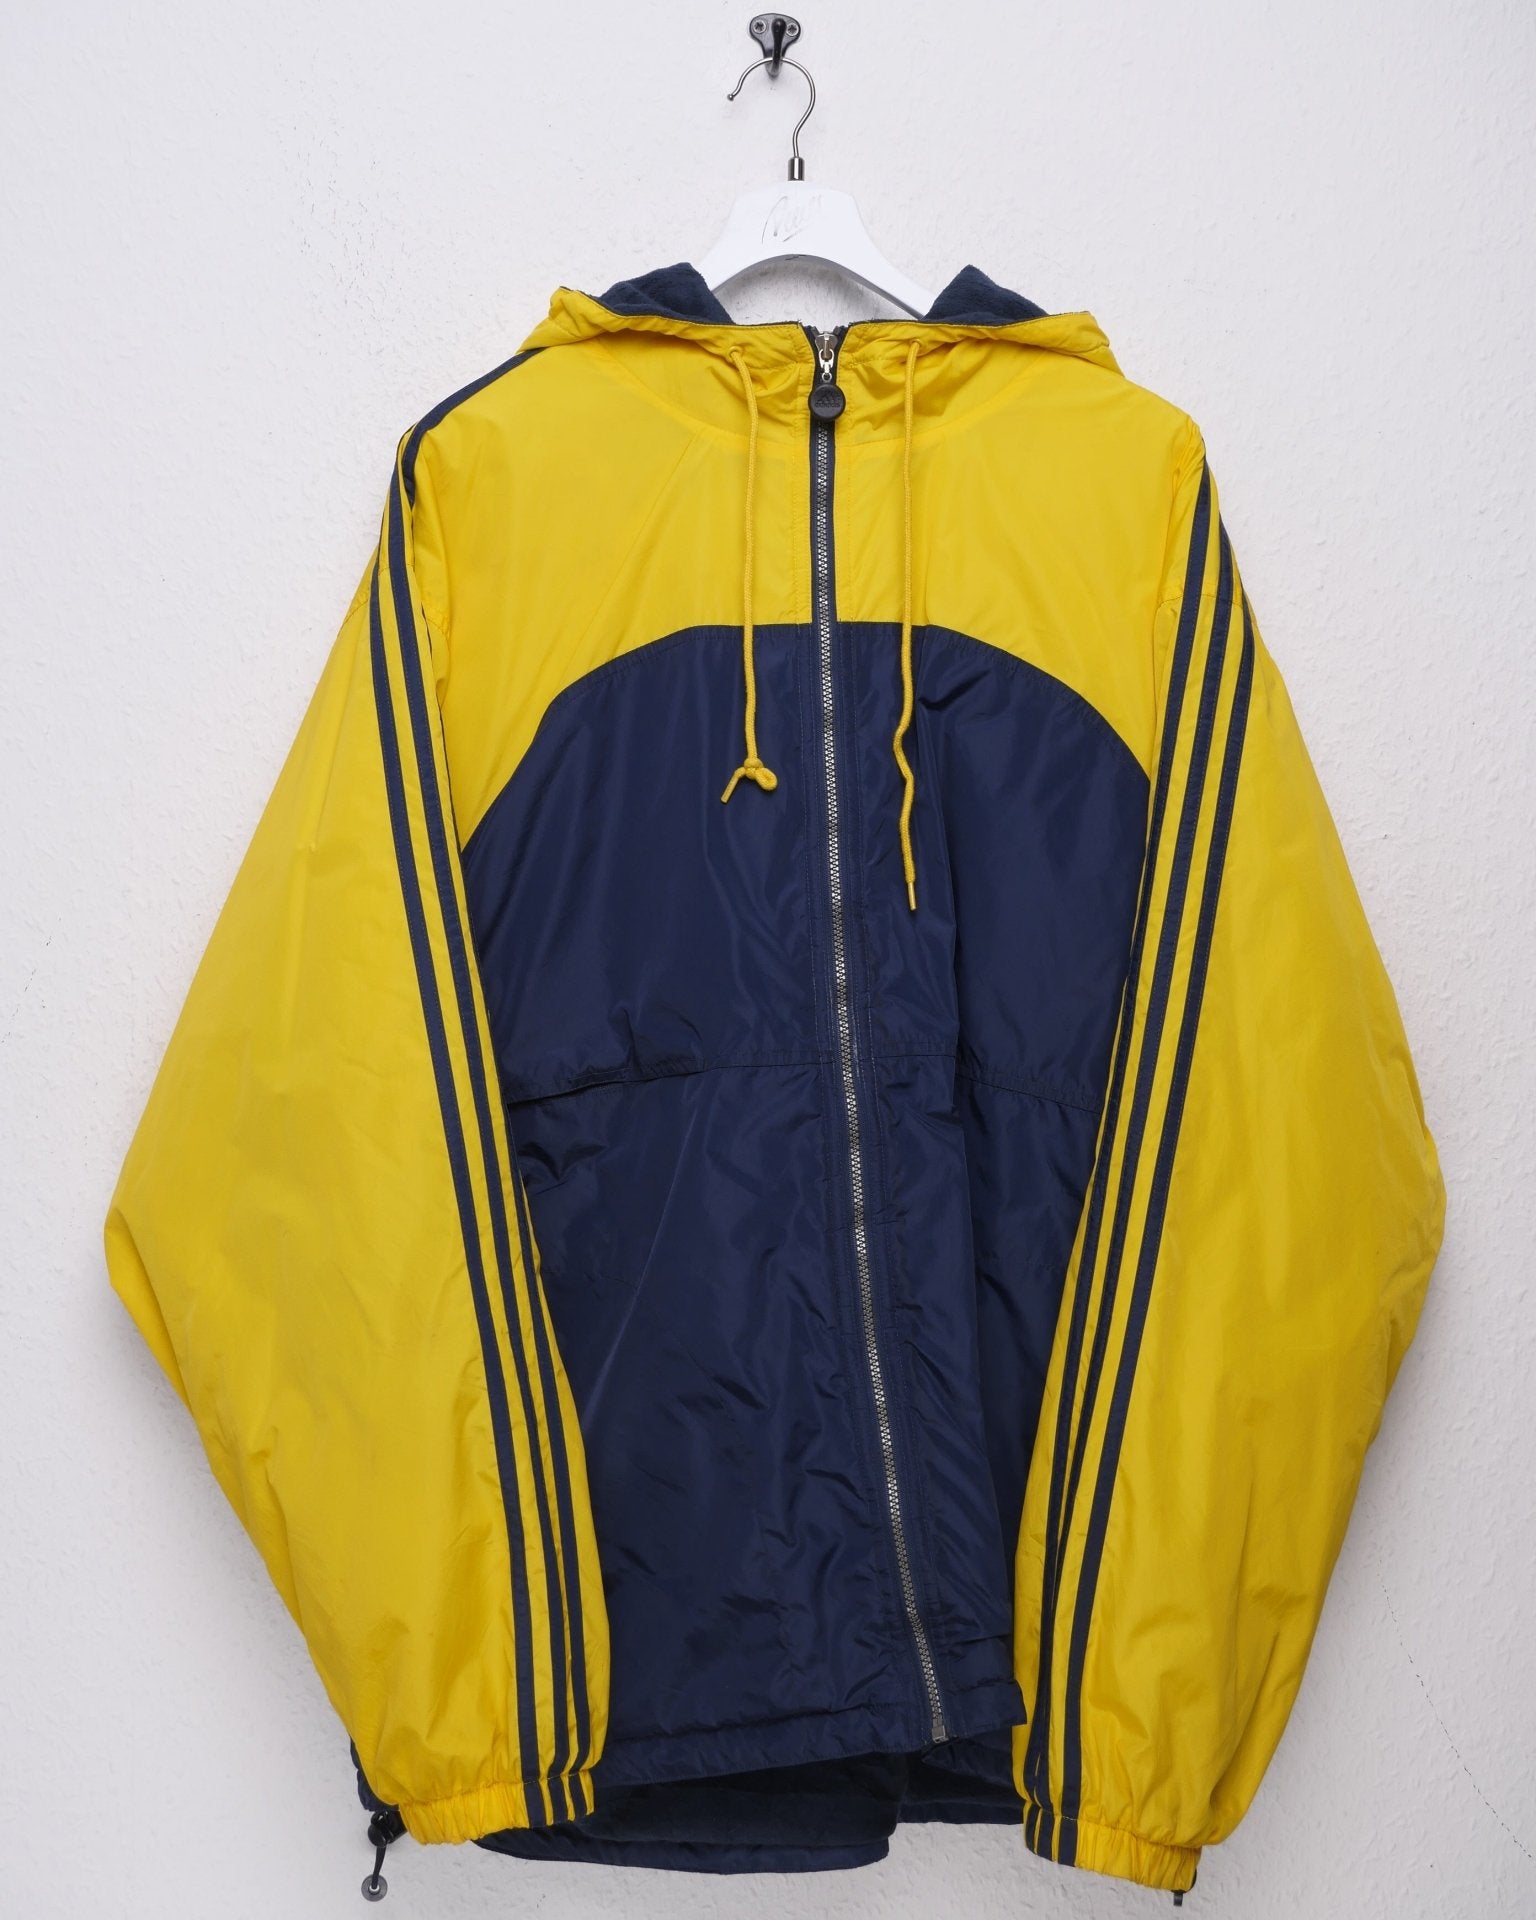 Adidas embroidered Logo two toned heavy Jacket - Peeces